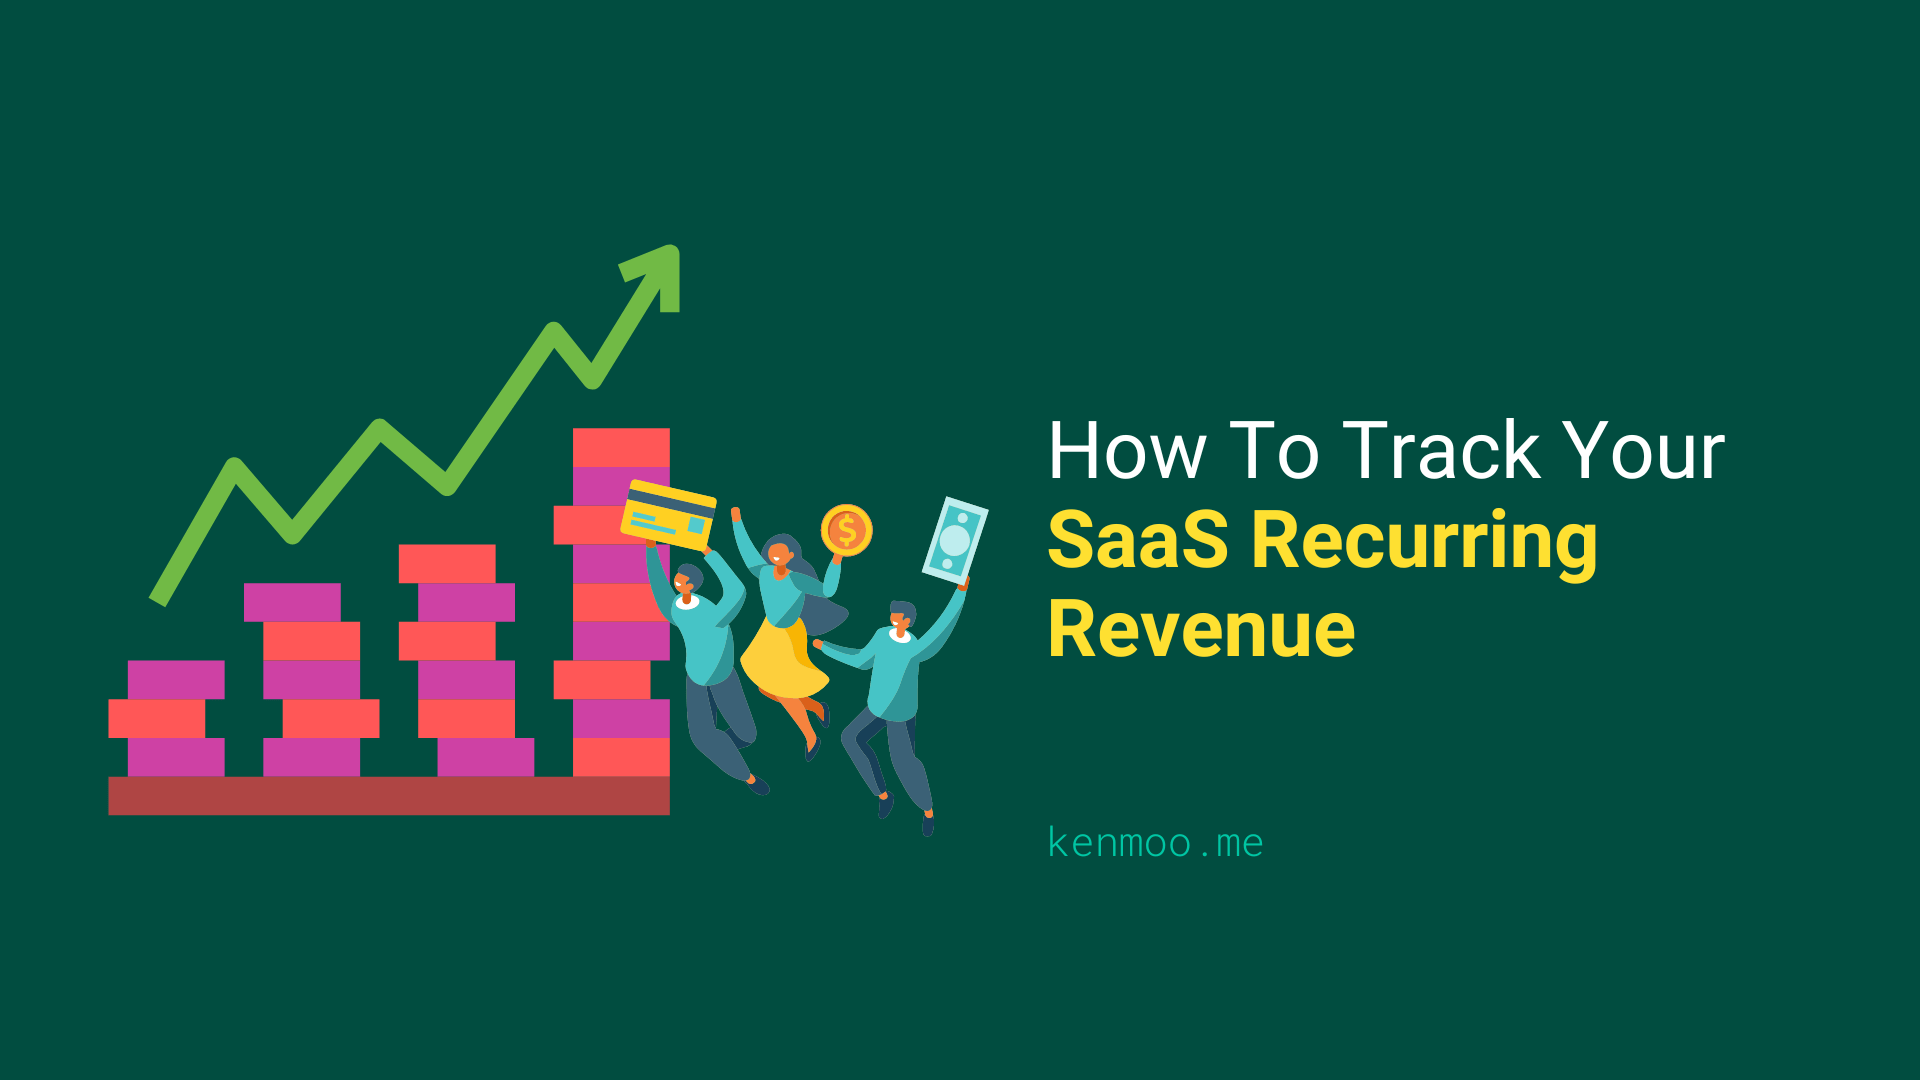 How To Track Your SaaS Recurring Revenue